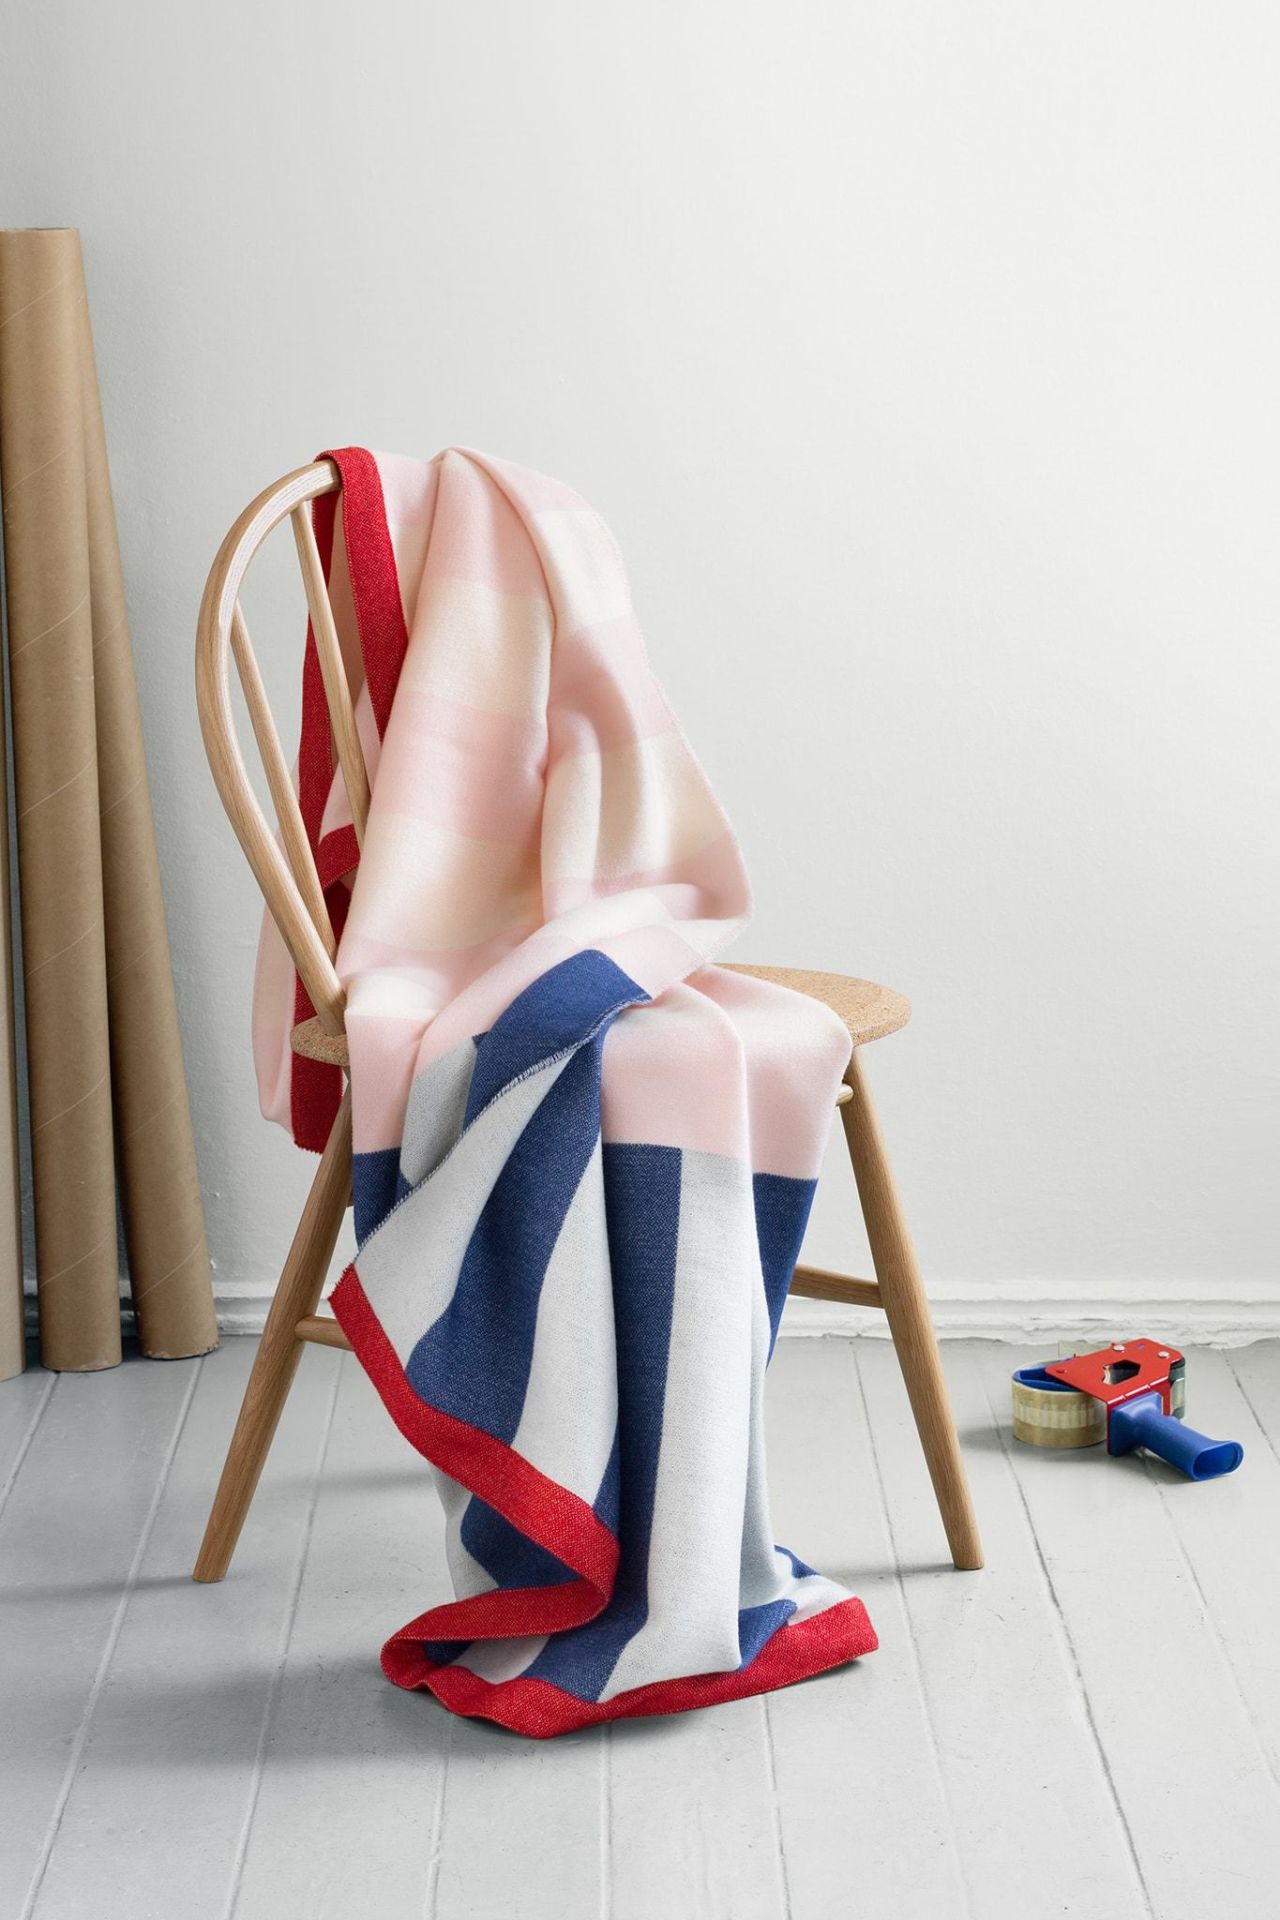 Stripe throw in Pink/Blue on Lars Beller Fjetland's Drifted chair